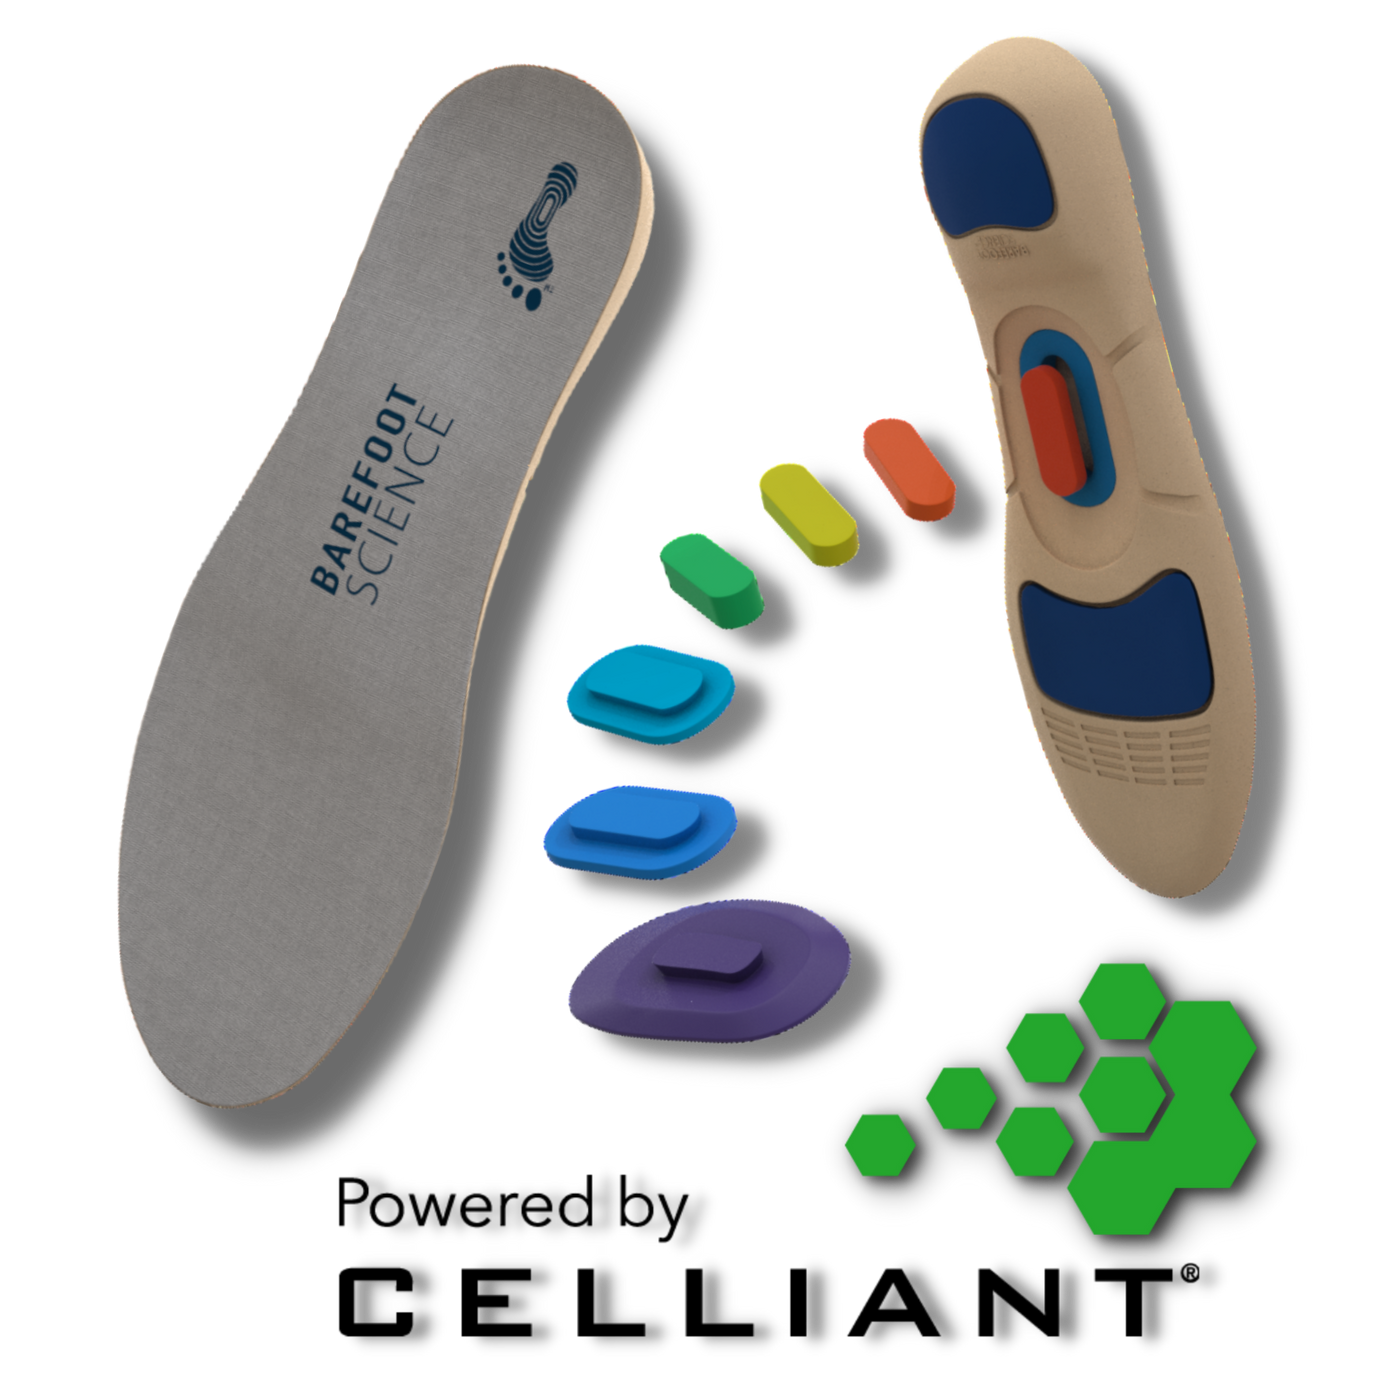 Barefoot Science Therapeutic PLUS Powered by Celliant Full Length top and bottom of insole with inserts